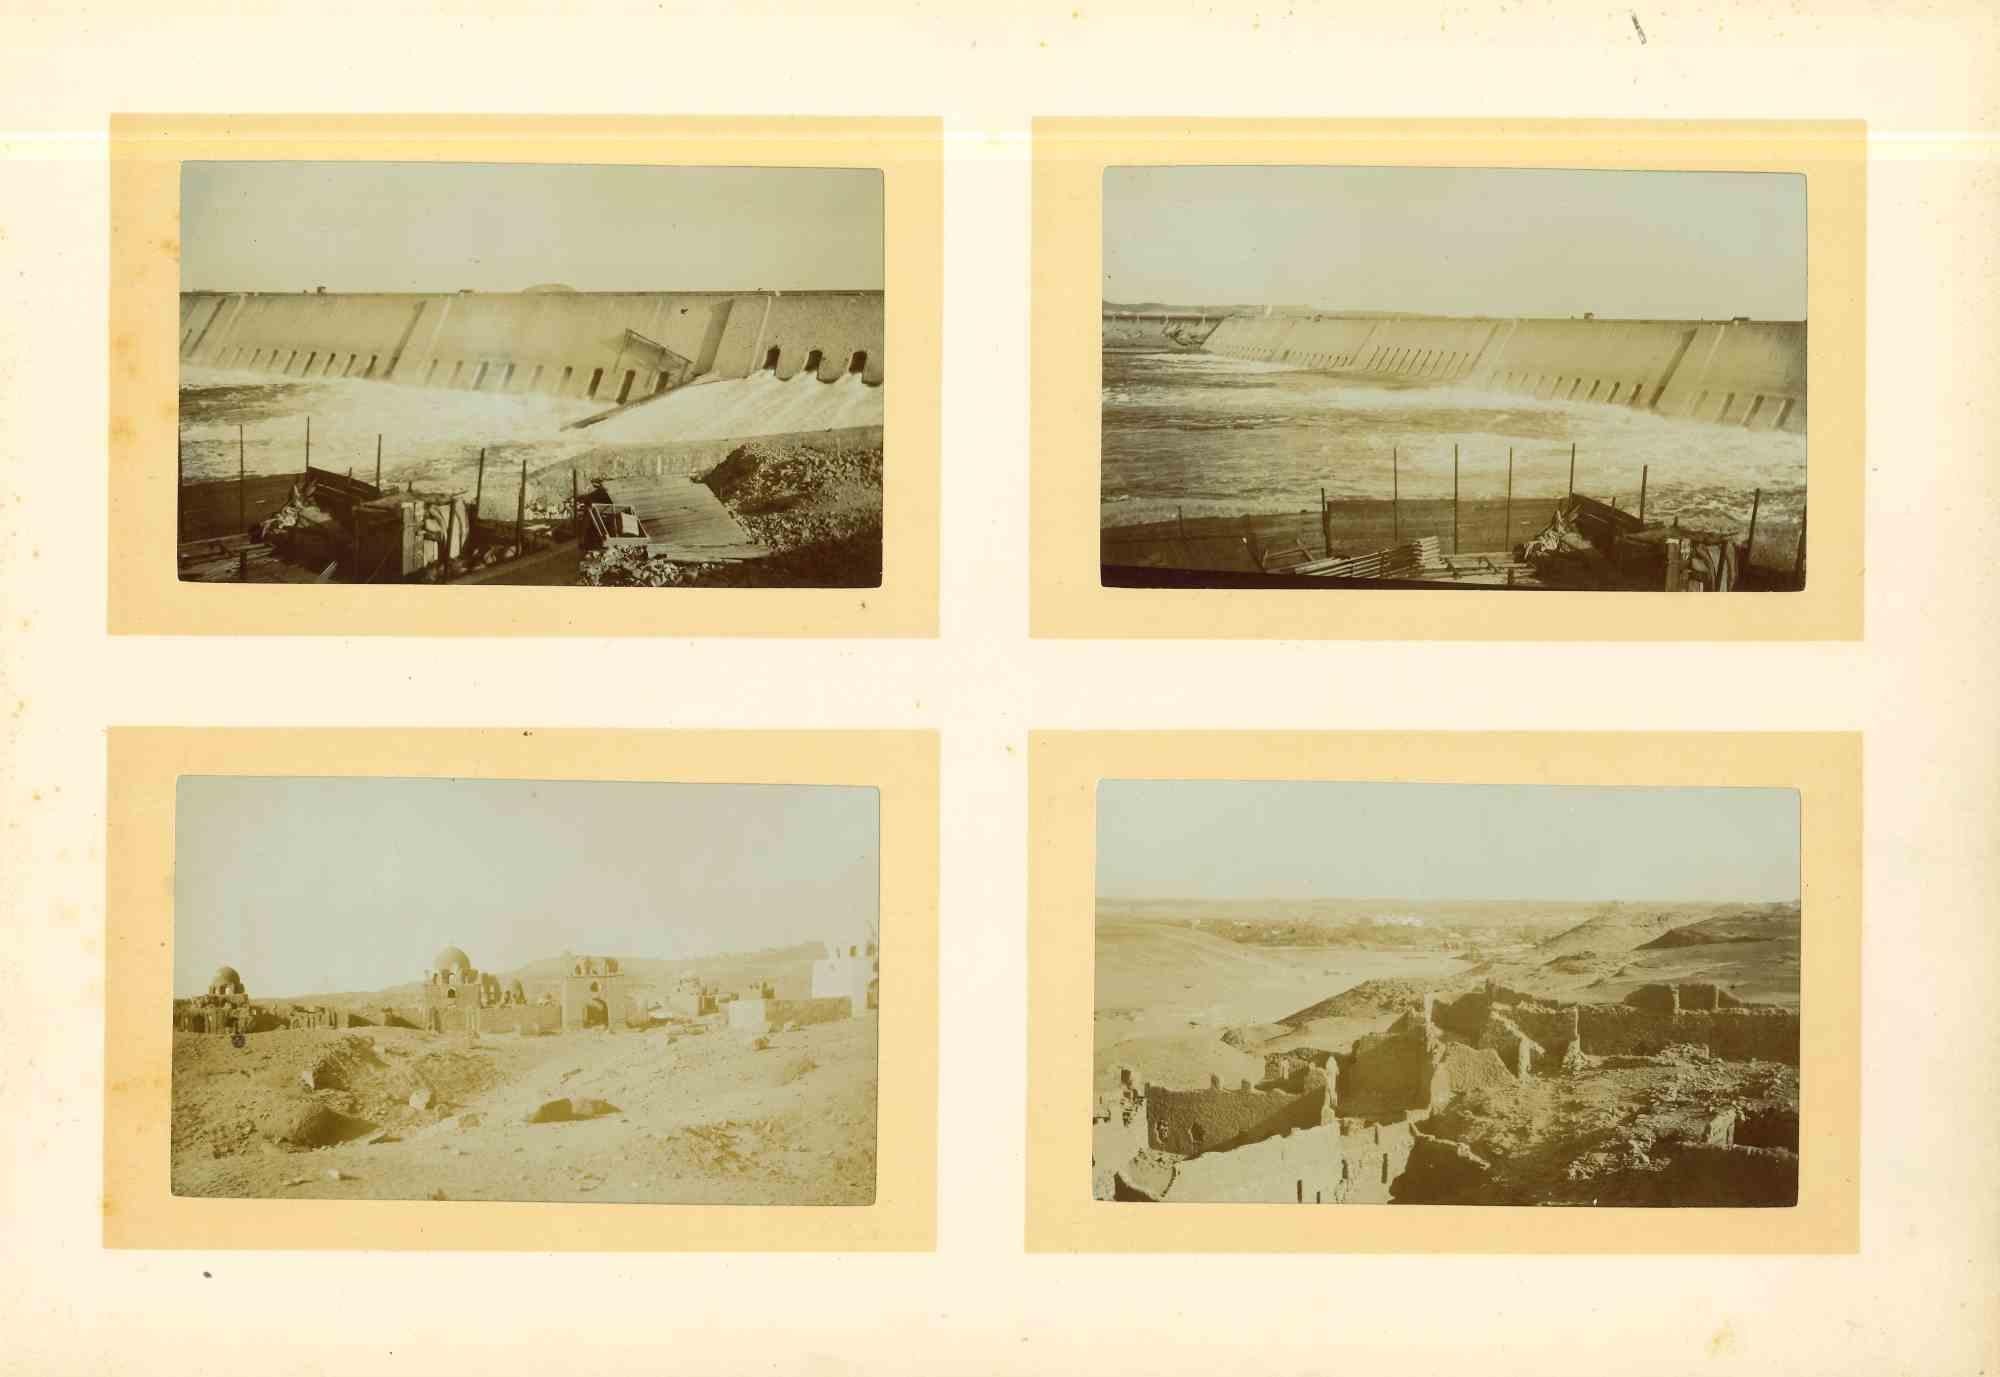 Landscape in Northern Africa - Vintage Photograph - Early 20th Century - White Figurative Photograph by Unknown